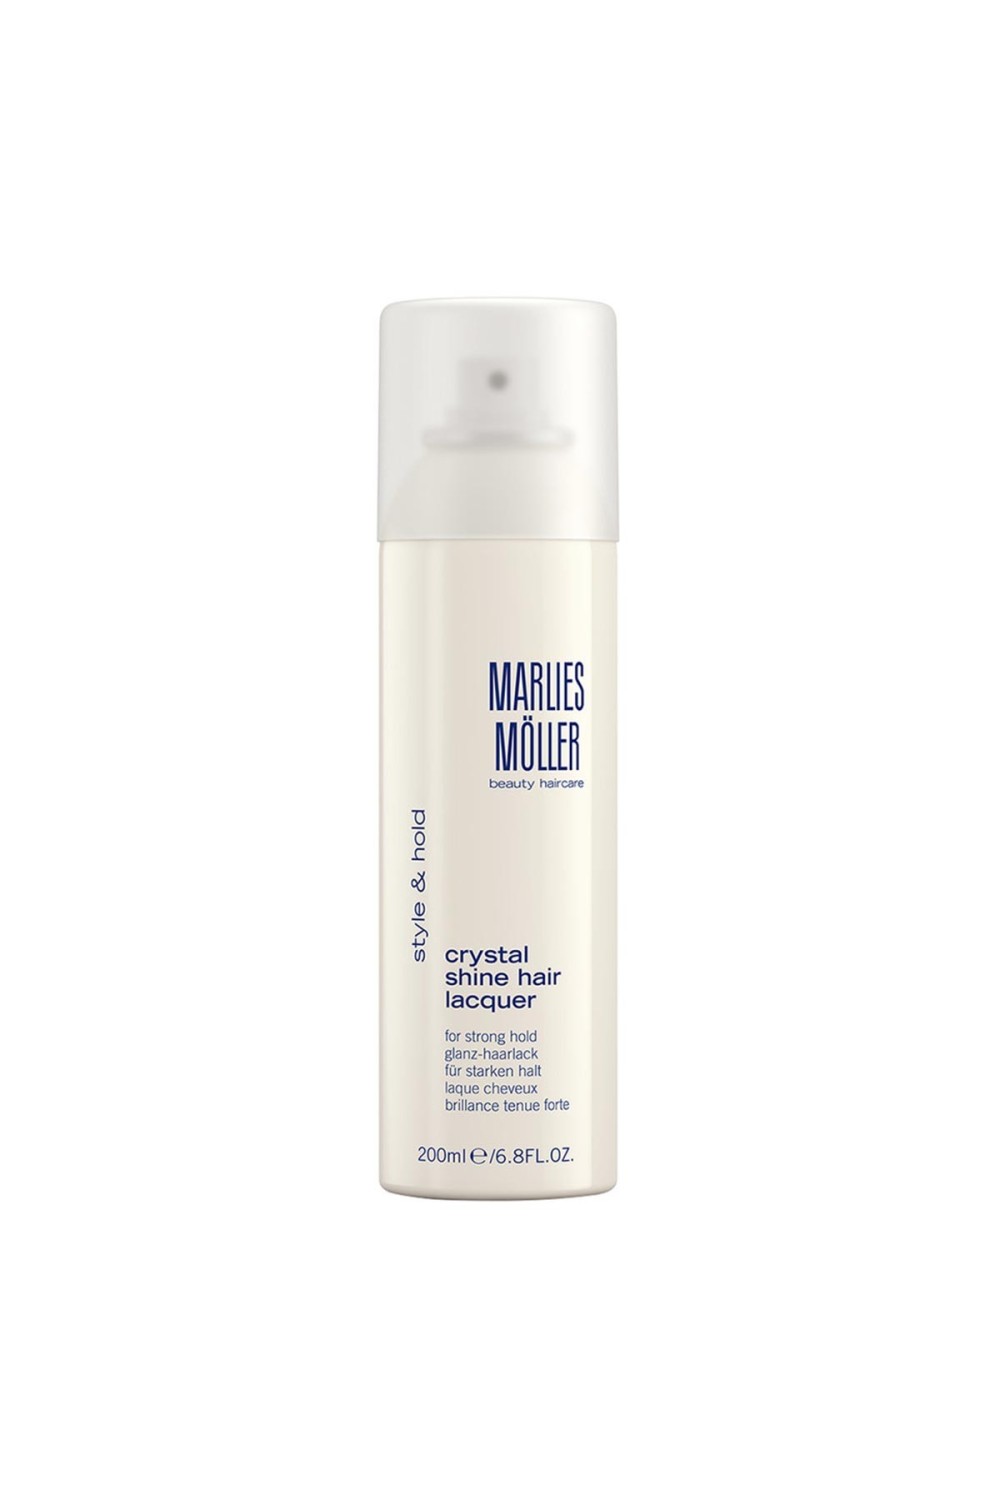 Marlies Moller Style And Hold Crystal Shine Lacquer 200ml